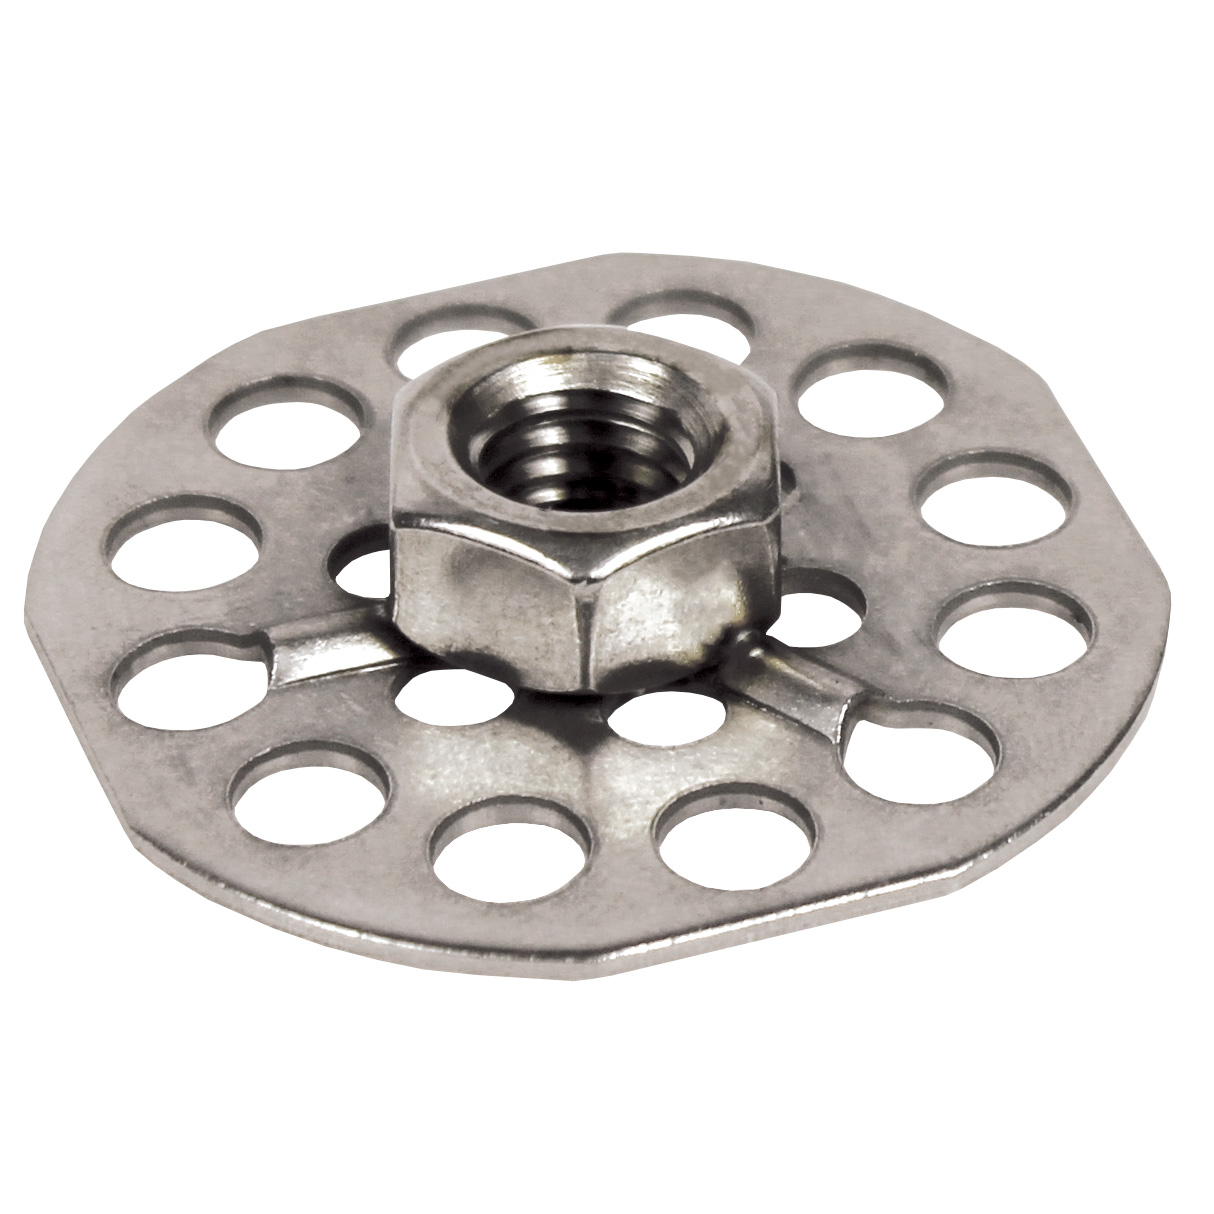 Masterplate® glueable insert - Cylindrical Ø38 with tapped insert - Stainless steel - 